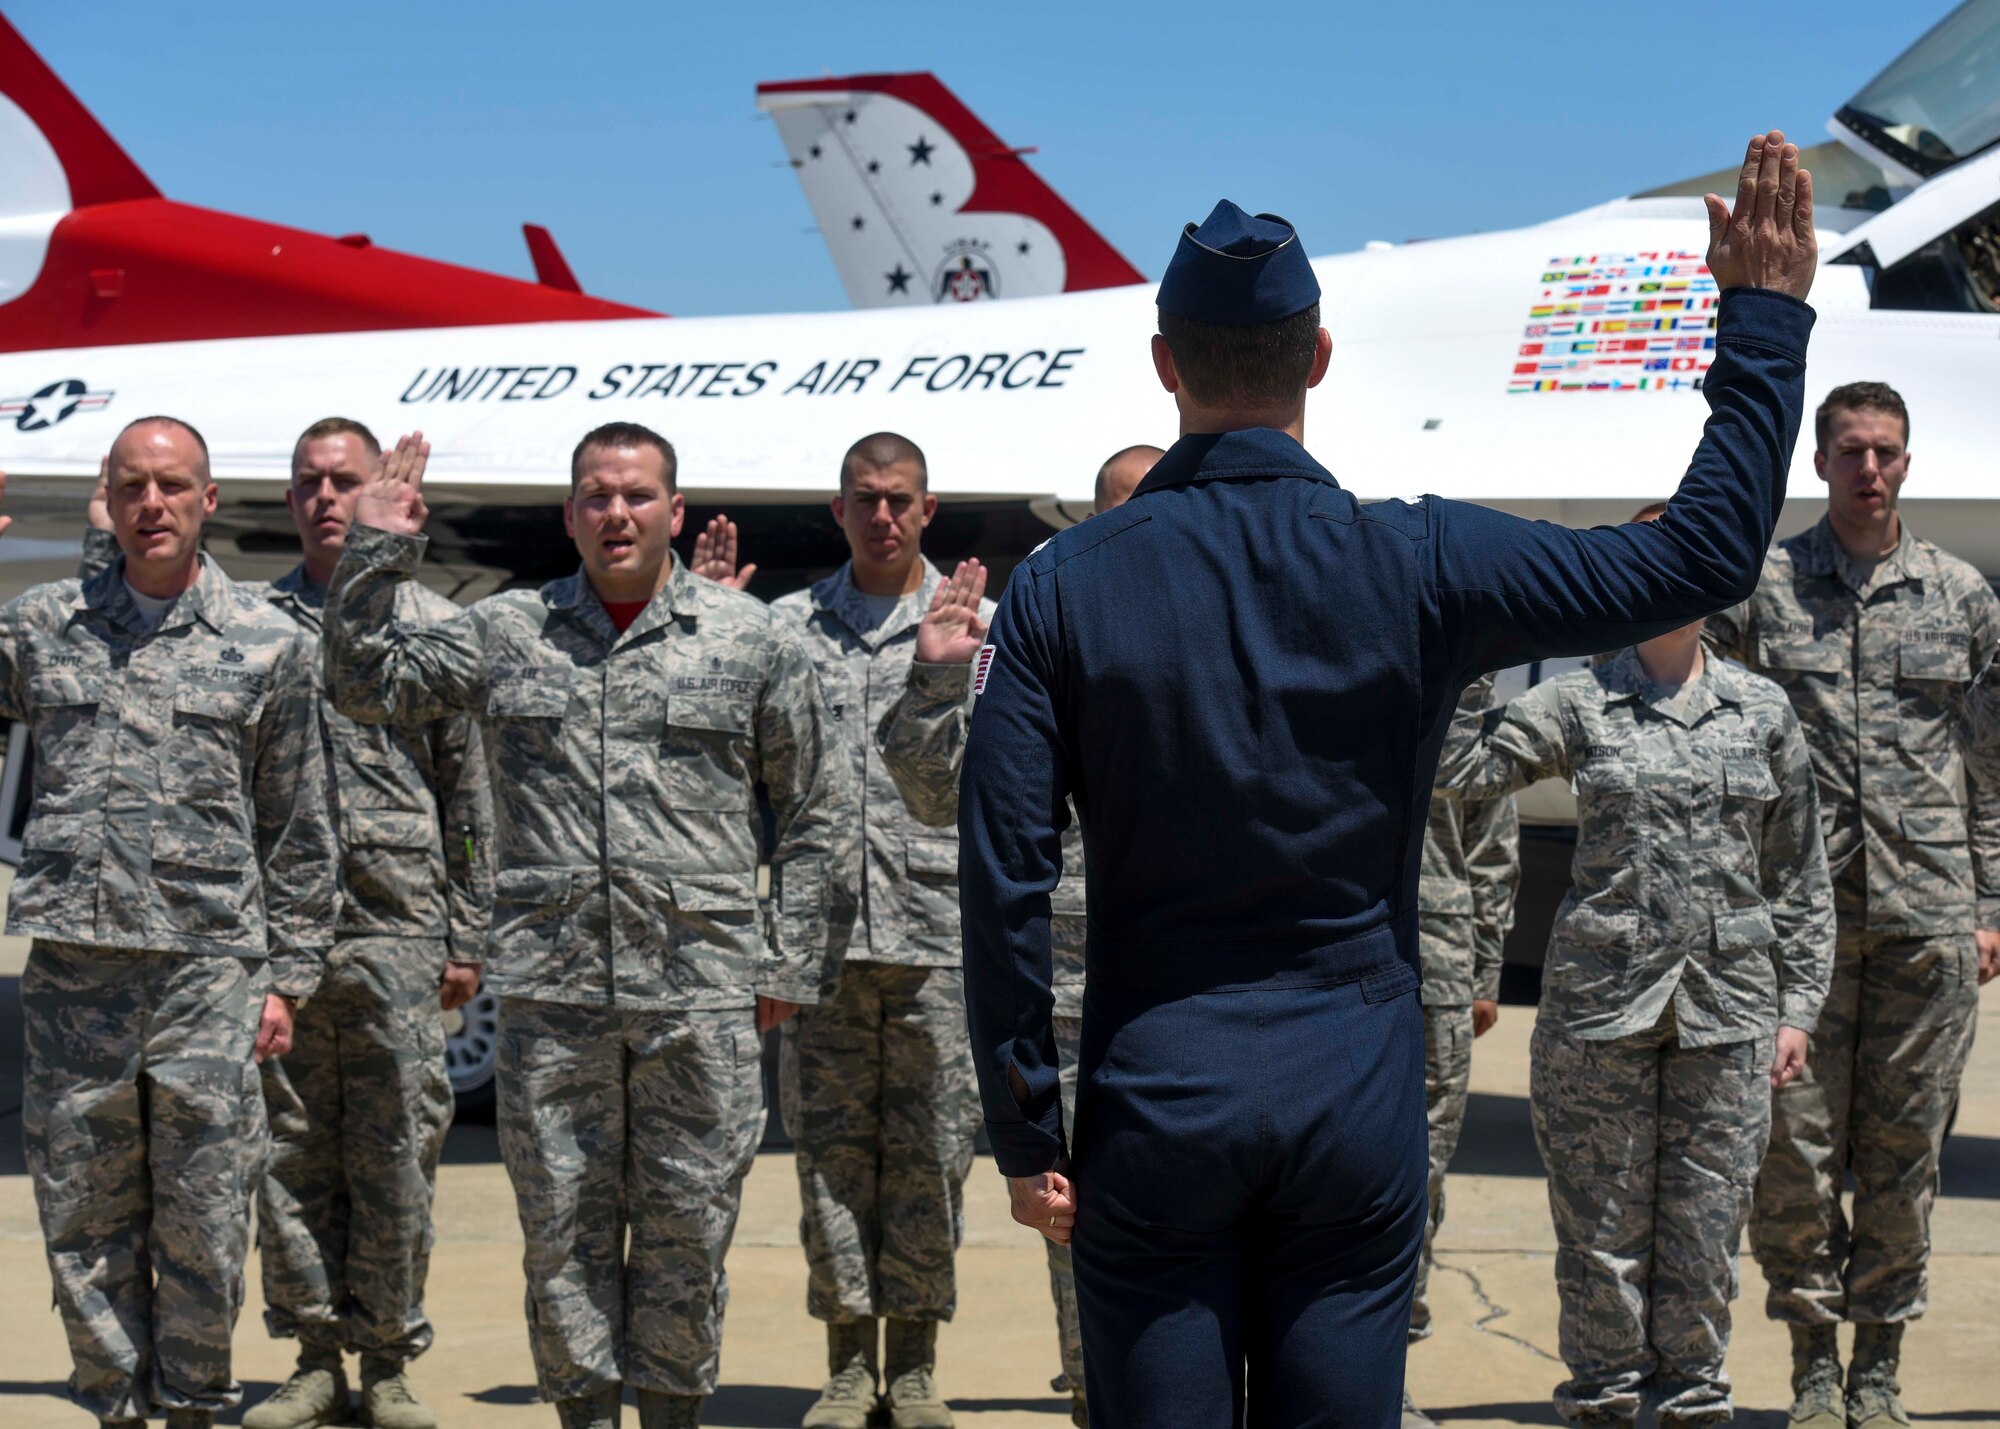 A group of Airmen reenlist into the Air Force with the Thunderbirds during the Scott Air Force Base Air Show, Scott Air Force Base, Ill., June 11, 2017. The base hosted the air show and open house to celebrate the 100th year of Scott AFB.  Over 50 aircraft, ranging from WWI’s Curtiss JN-4 Jenny to the currently utilized KC-135 Stratotanker, came to Scott, the fourth oldest Air Force base. Demonstrations included the Black Daggers, “Tora, Tora, Tora,” and the USAF Thunderbirds. Opened in 1917 and previously named Scott Field, the base has seen its mission evolve and expand to encompass a multitude of priorities, including aeromedical evacuation and communications.  Today, Scott is home to 31 mission partners and provides around-the-clock logistics support and rapid global mobility, carried out primarily by U.S. Transportation Command and Air Mobility Command.